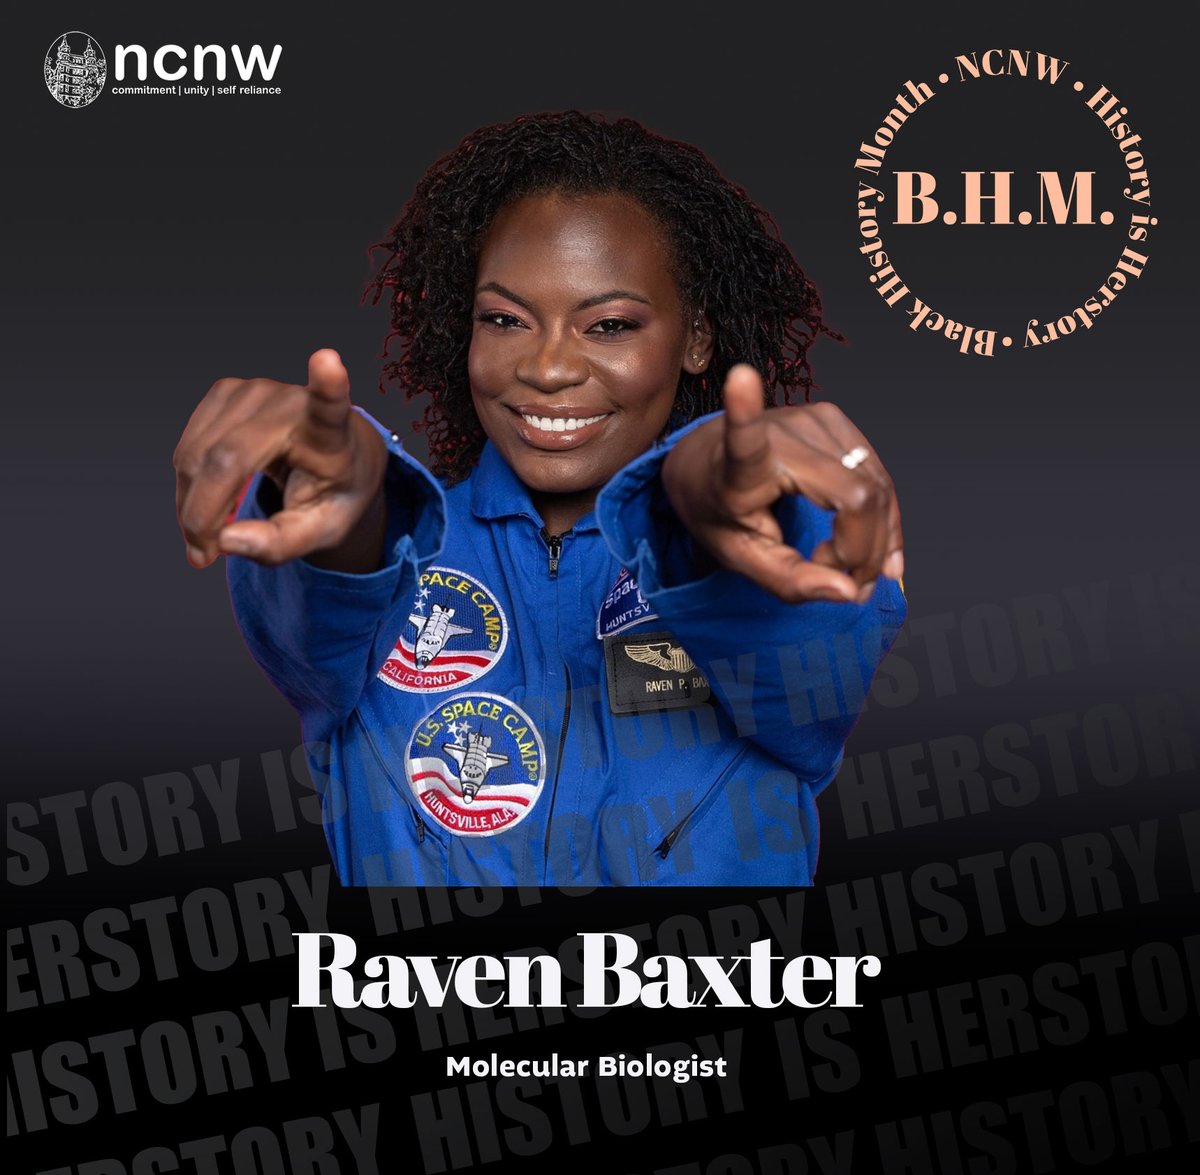 Raven Baxter is a molecular biologist by training and a popular science communicator better known as Dr. Raven the Science Maven. She aims to 'joyfully disrupt traditional cultural perceptions about scientists.' (Credit: Forbes) #ncnw #blackhistorymonth